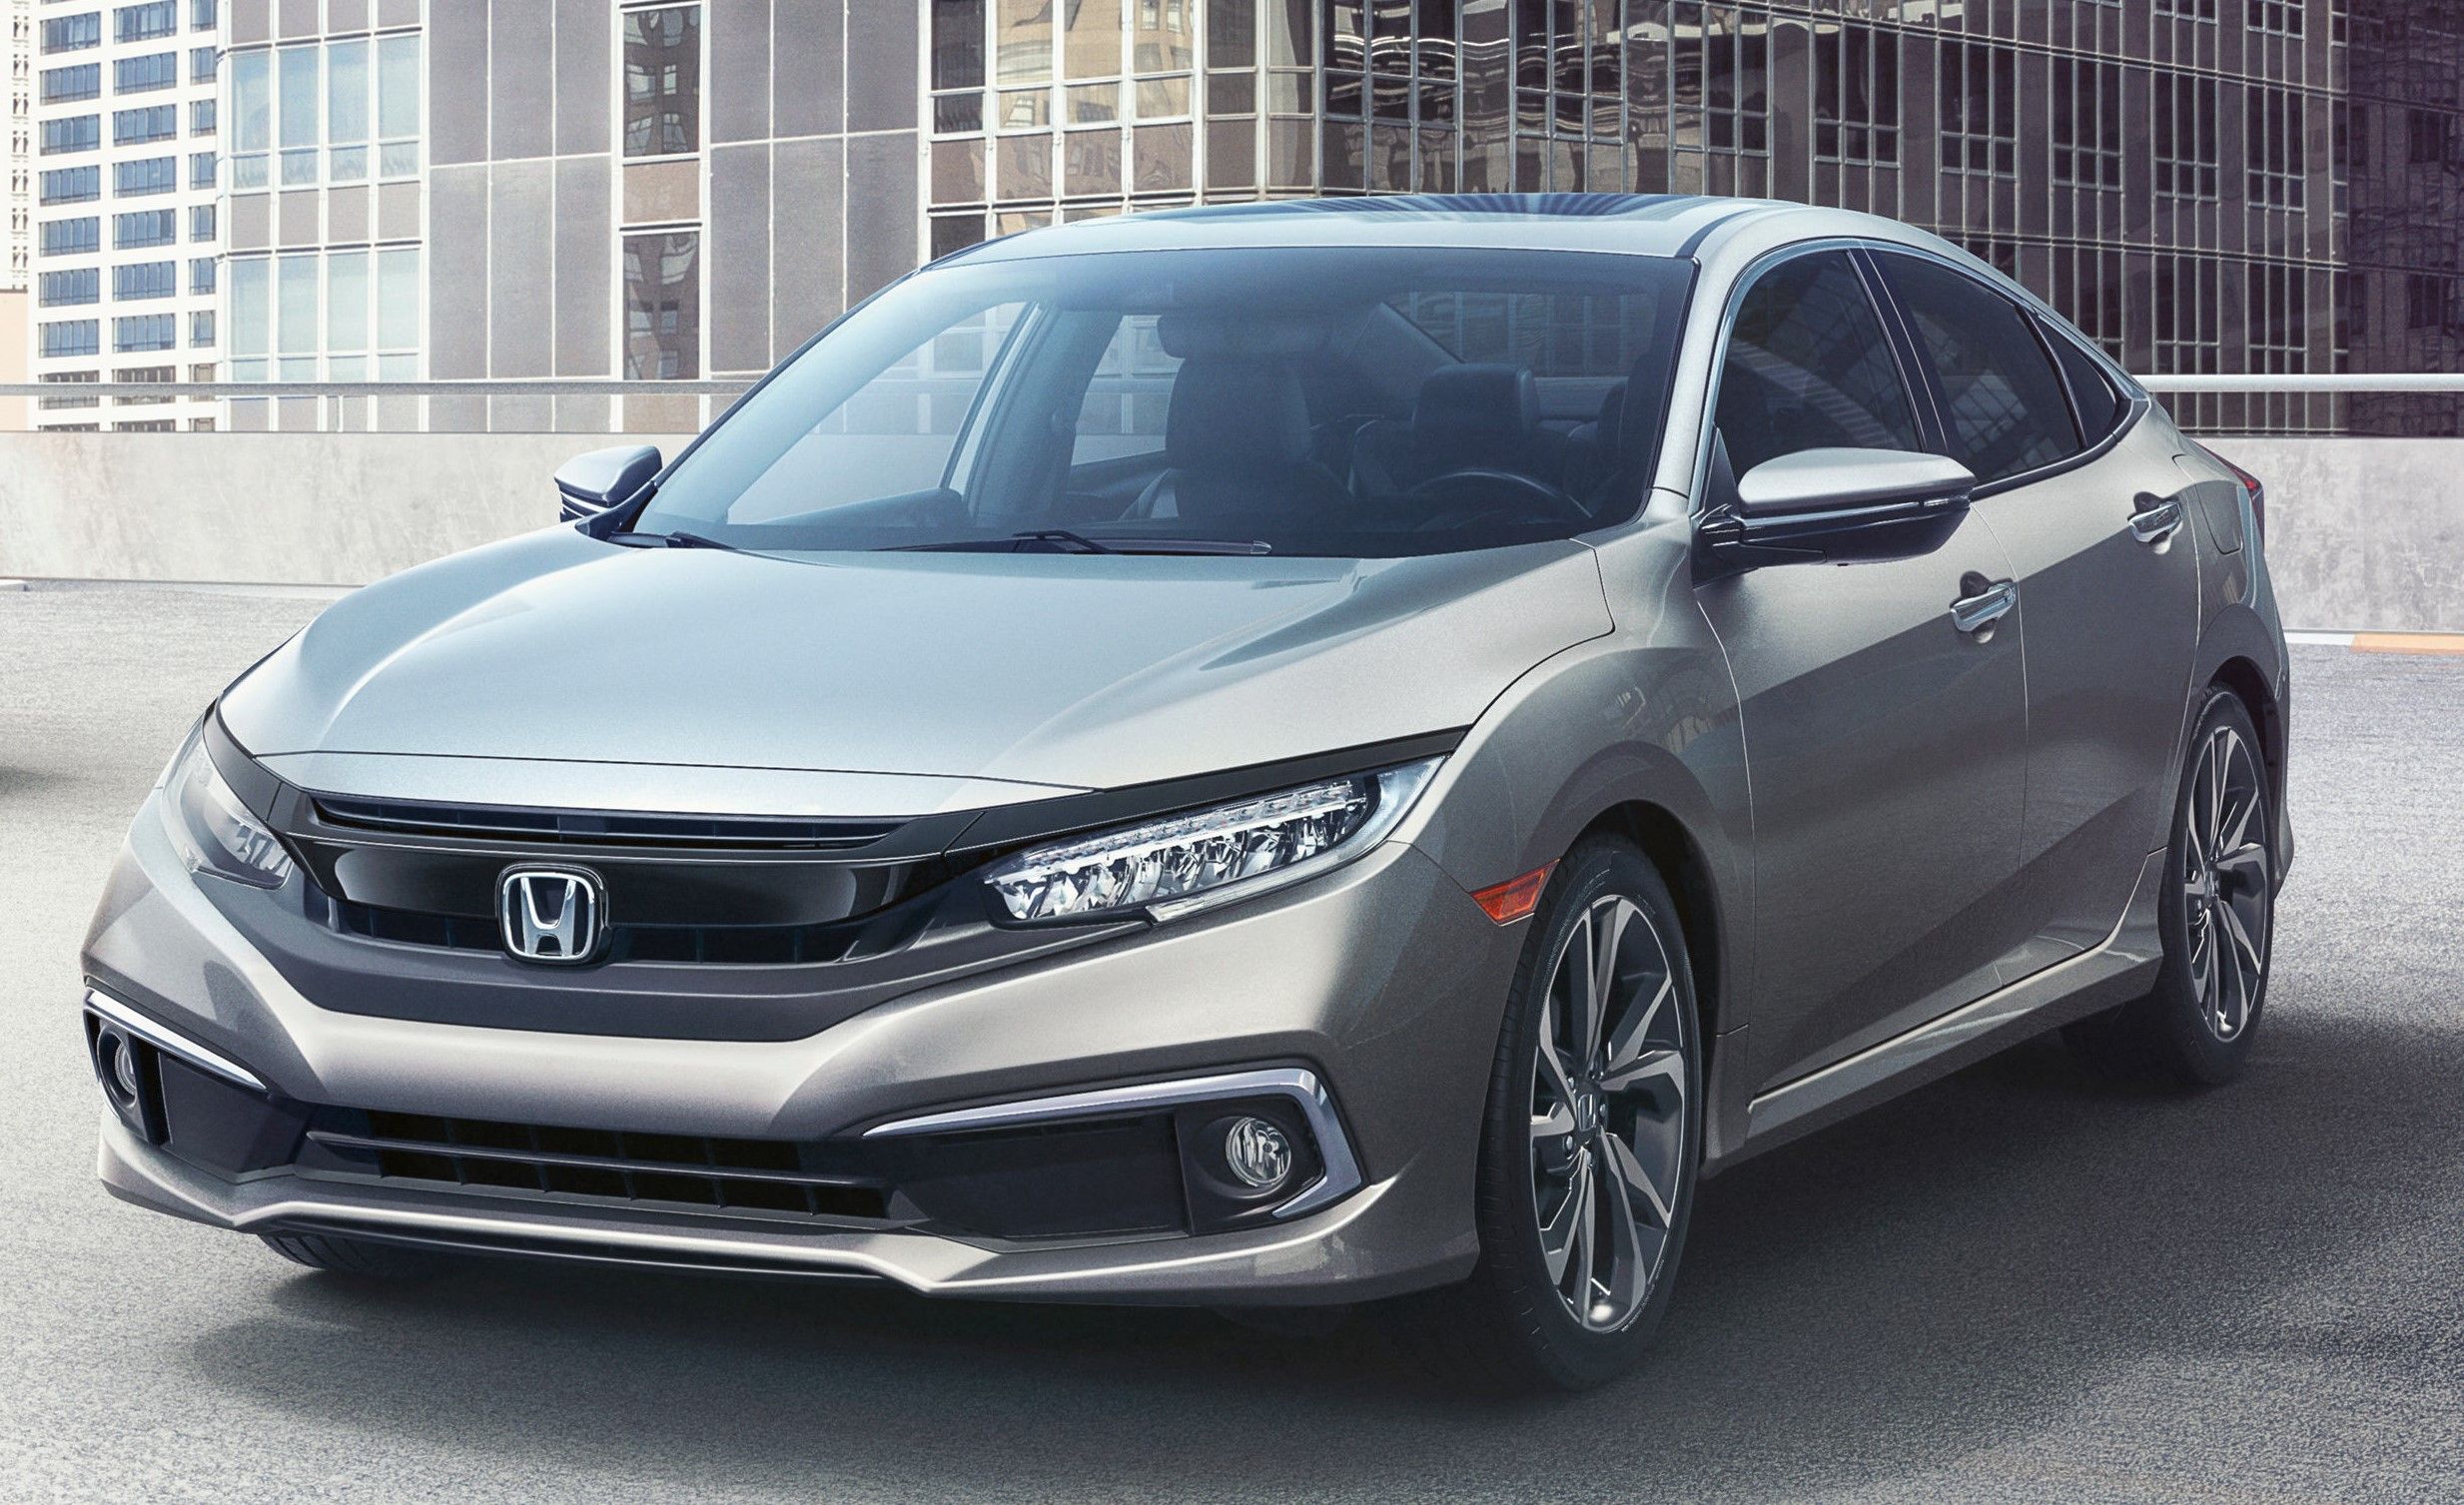 2019 The 2019 Honda Civic Is Safer and Better Looking